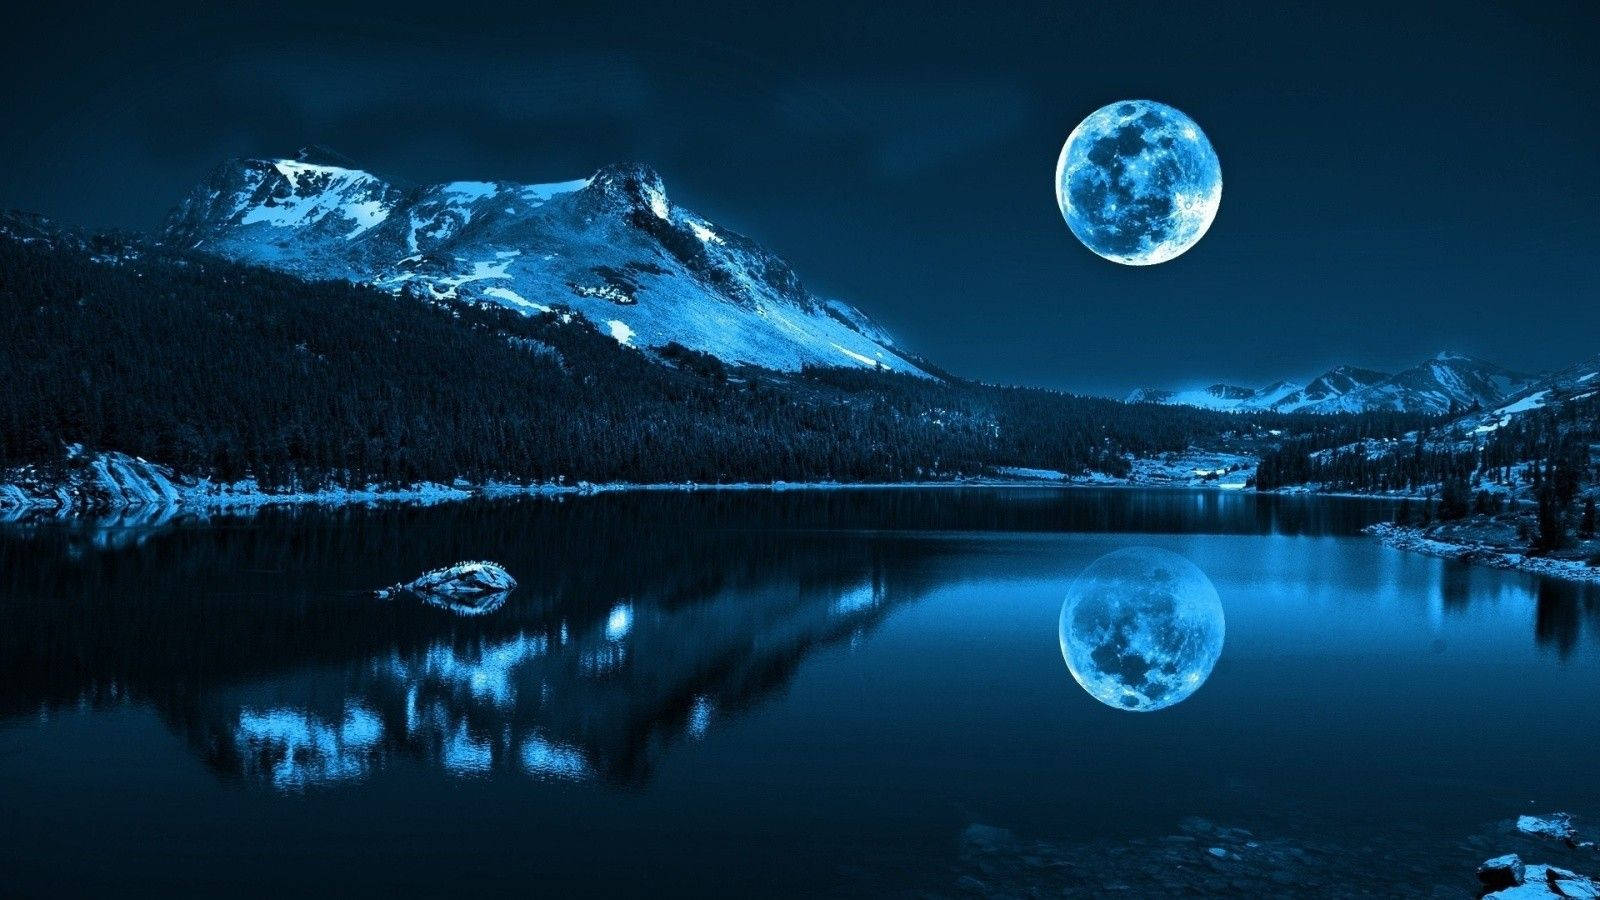 The bright blue full moon in the night sky Wallpaper